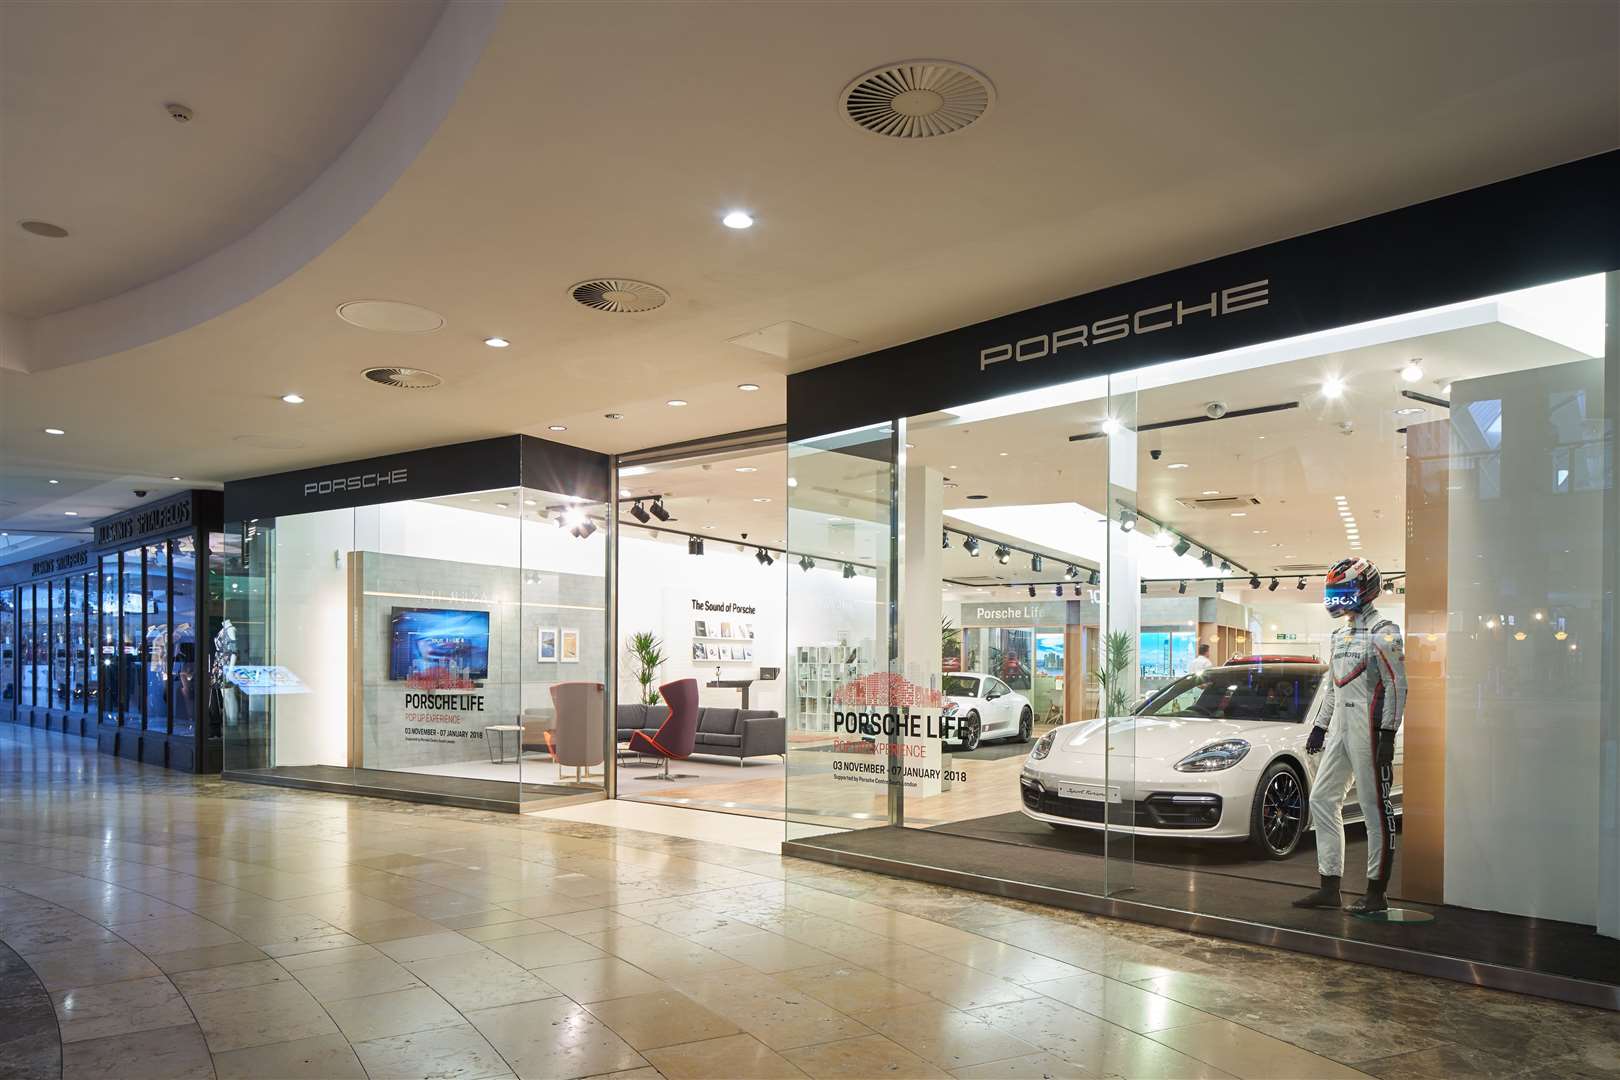 A Porsche pop-up store has opened at Bluewater